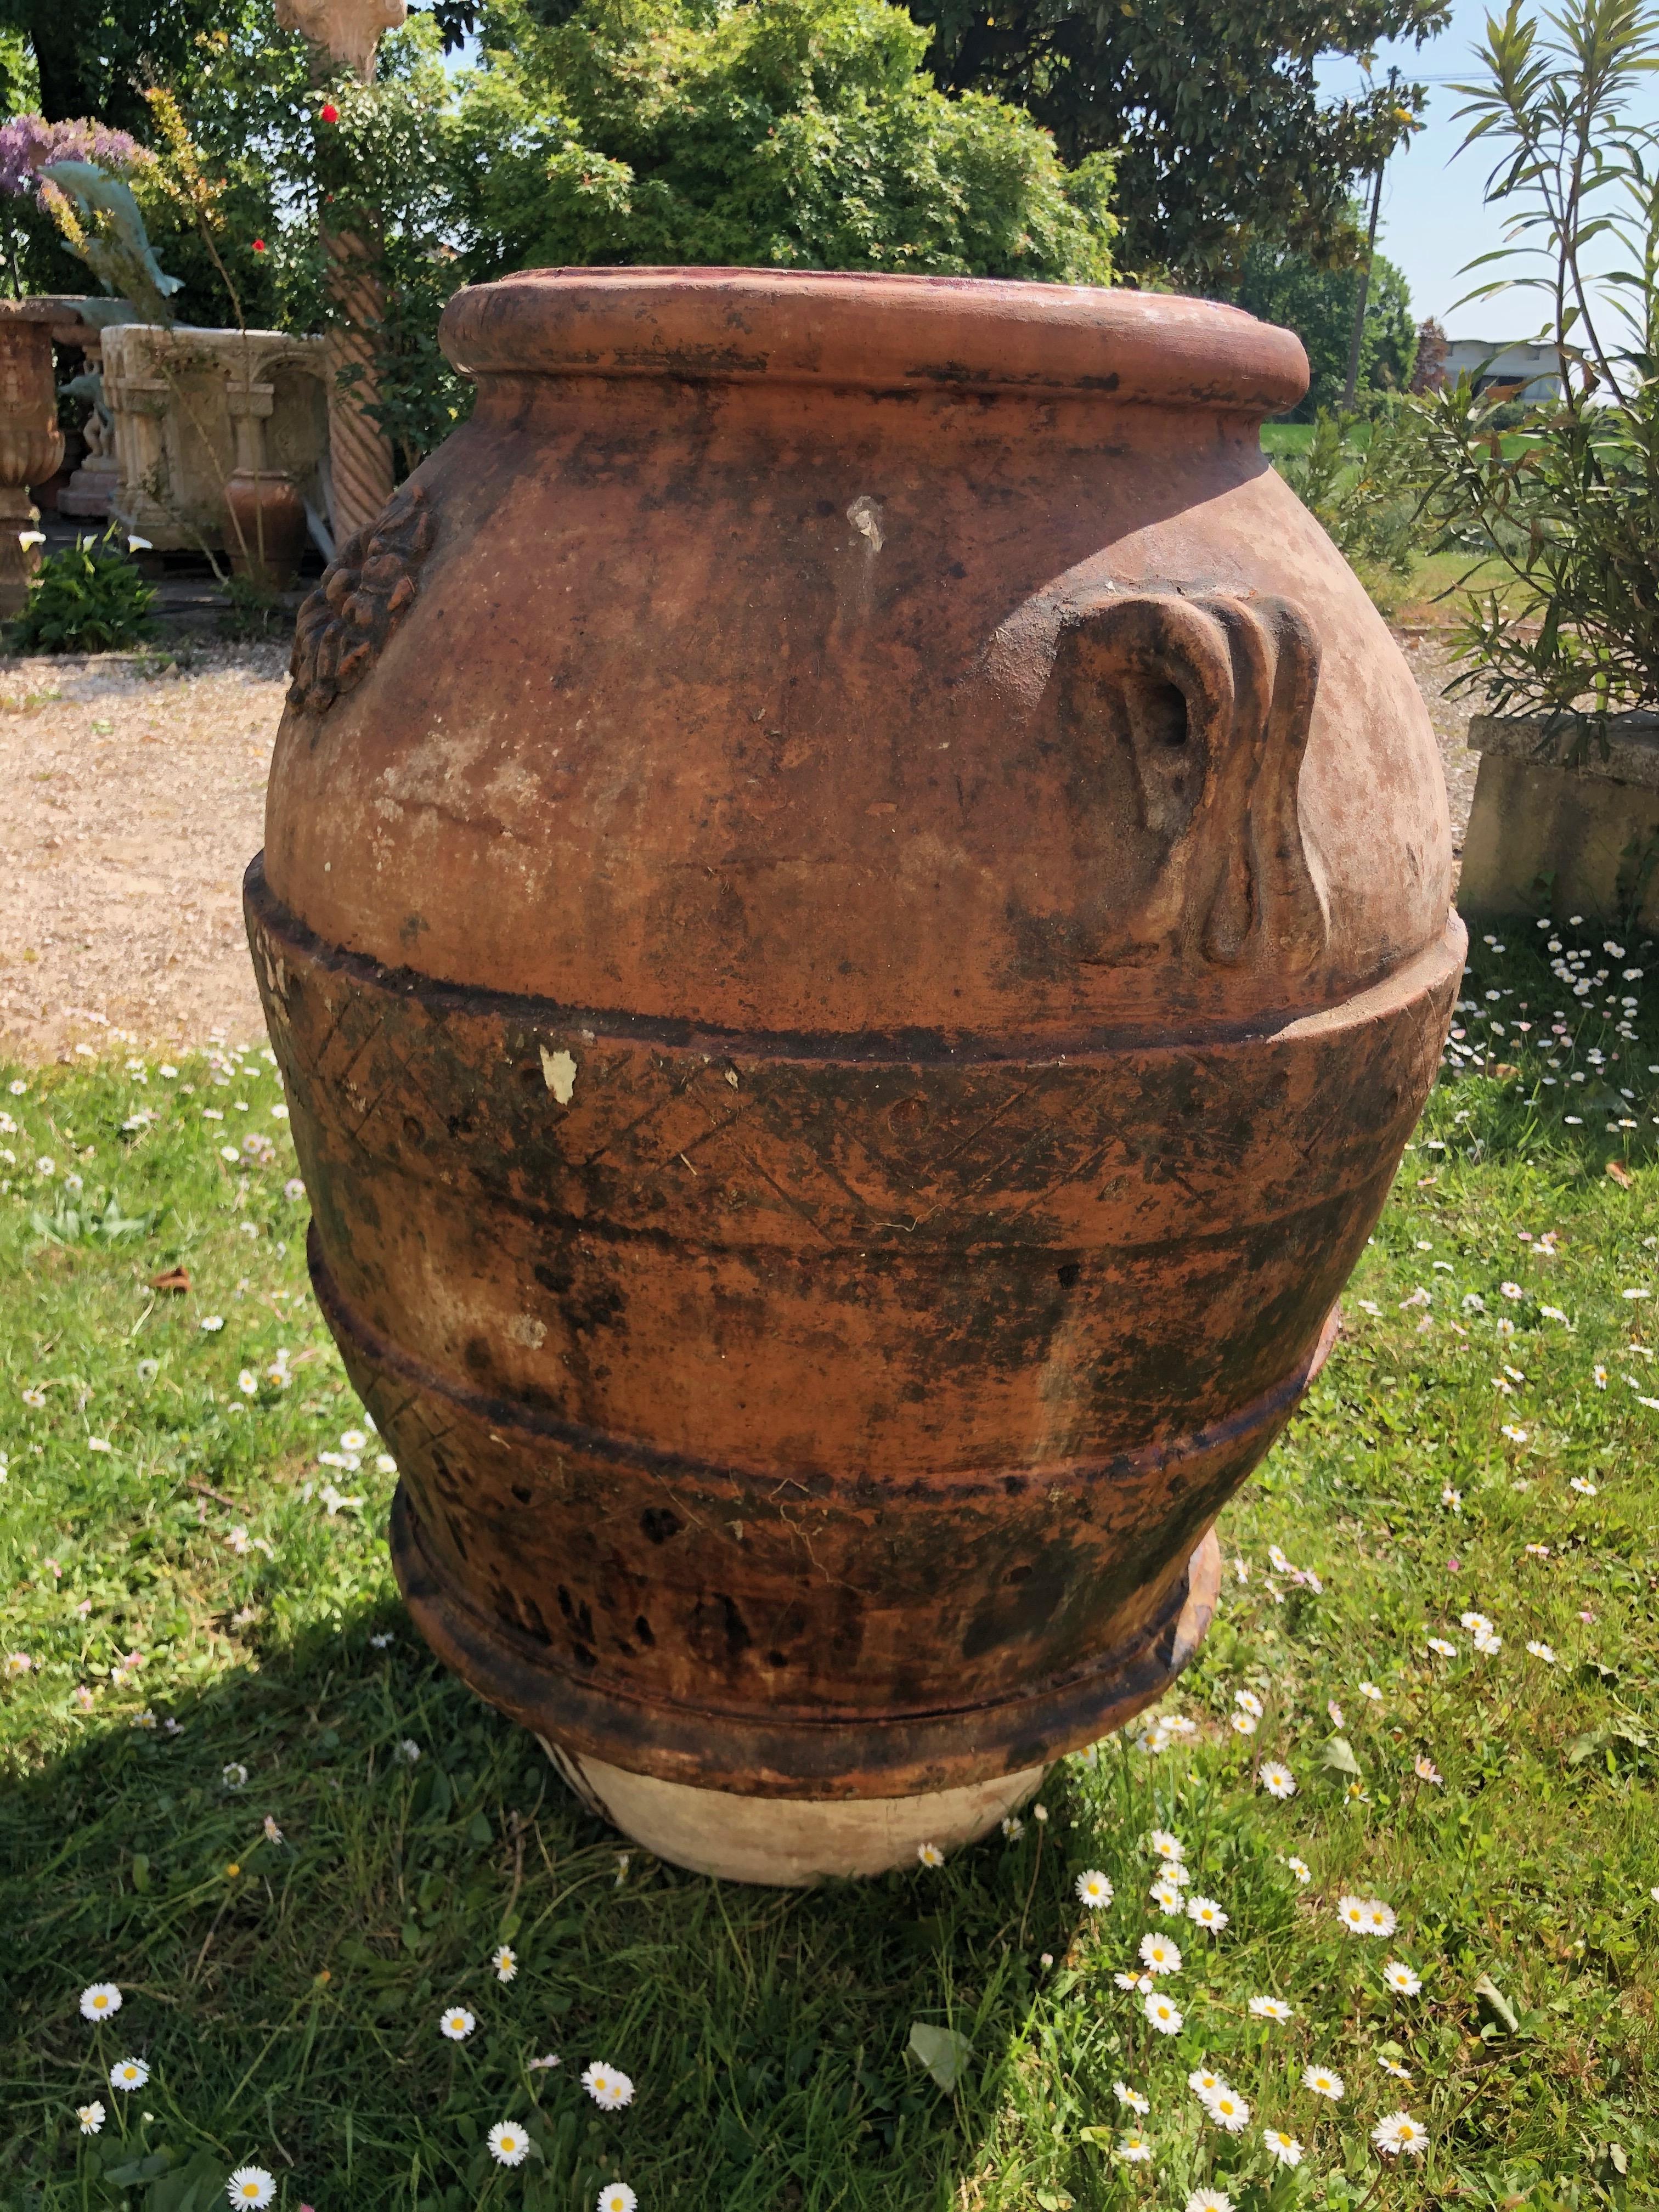 Large 20th italian terrocotta garden  jar / vase by the famous manufacture of Impruneta. It's dated 1900.

Dimensions: Height 105 cm Width 80 cm

In good generale condition.

The most famous kind of Tuscan terracotta is produced in Impruneta,